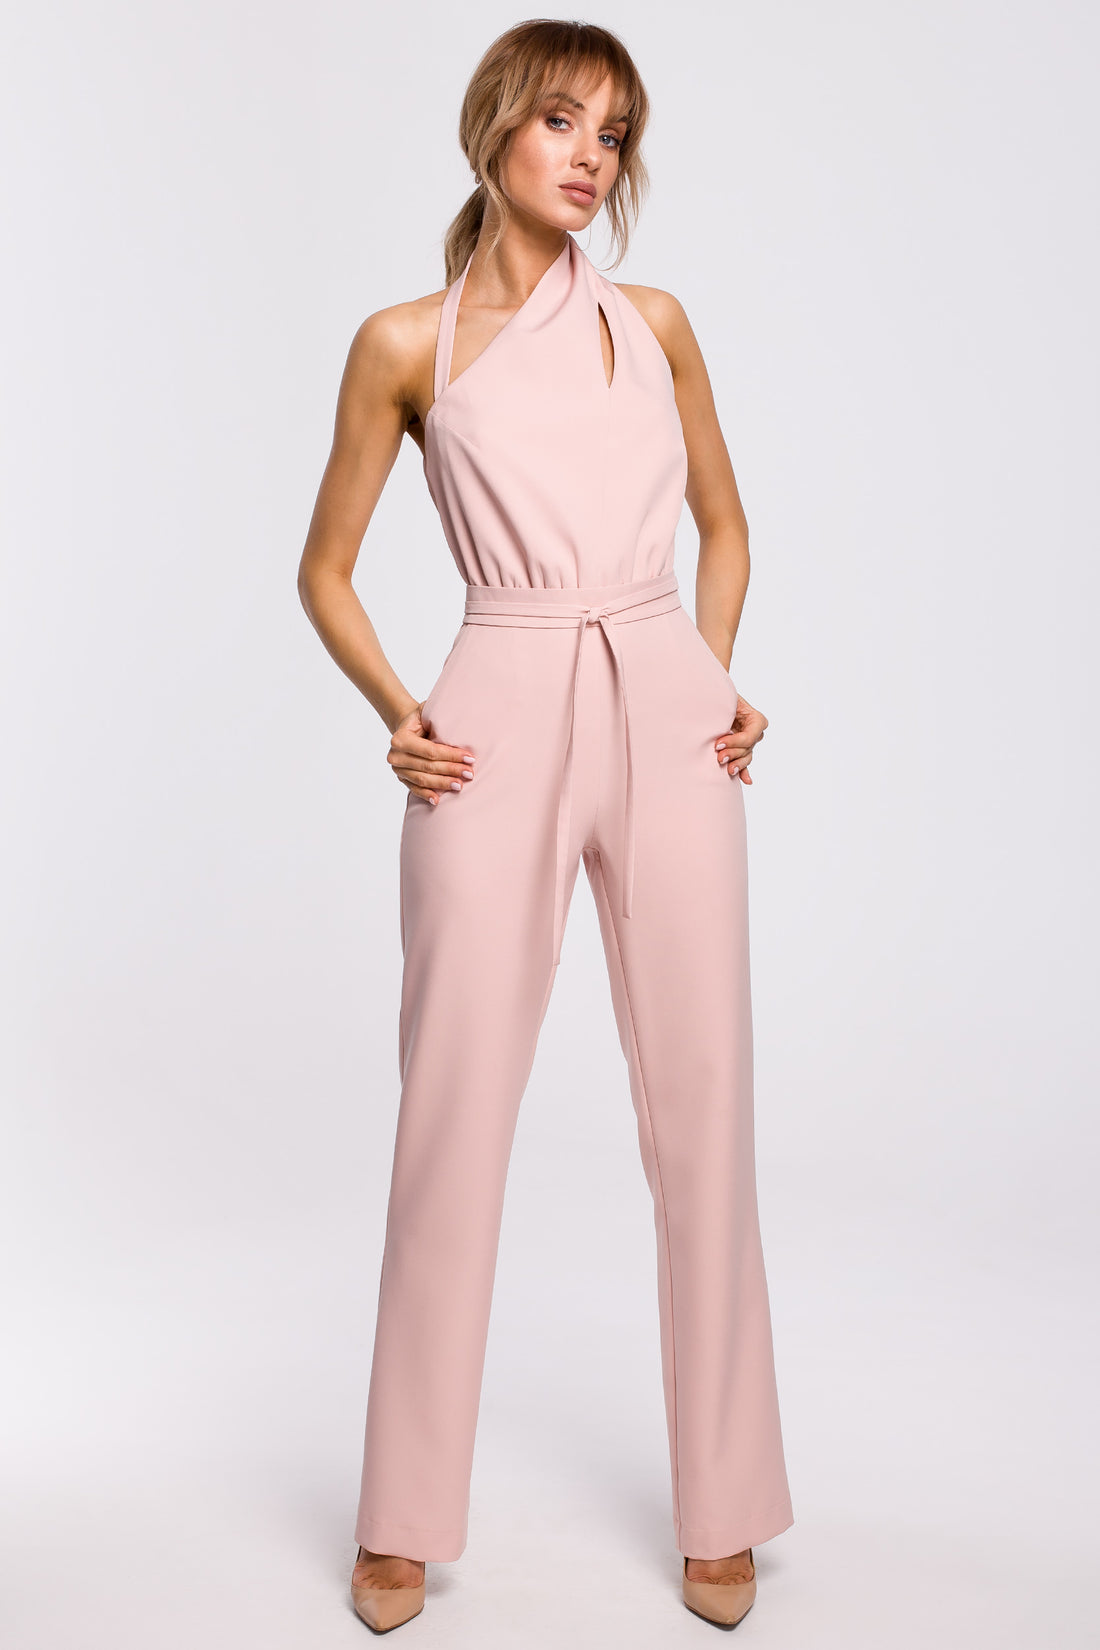 Our women's jumpsuit with pockets is the pinnacle of fashion and utility. This exquisite jumpsuit, which has a captivating open-back design and a subtly asymmetric neck halter neckline with a stylish cut-out detail, expertly combines simplicity and elegance.